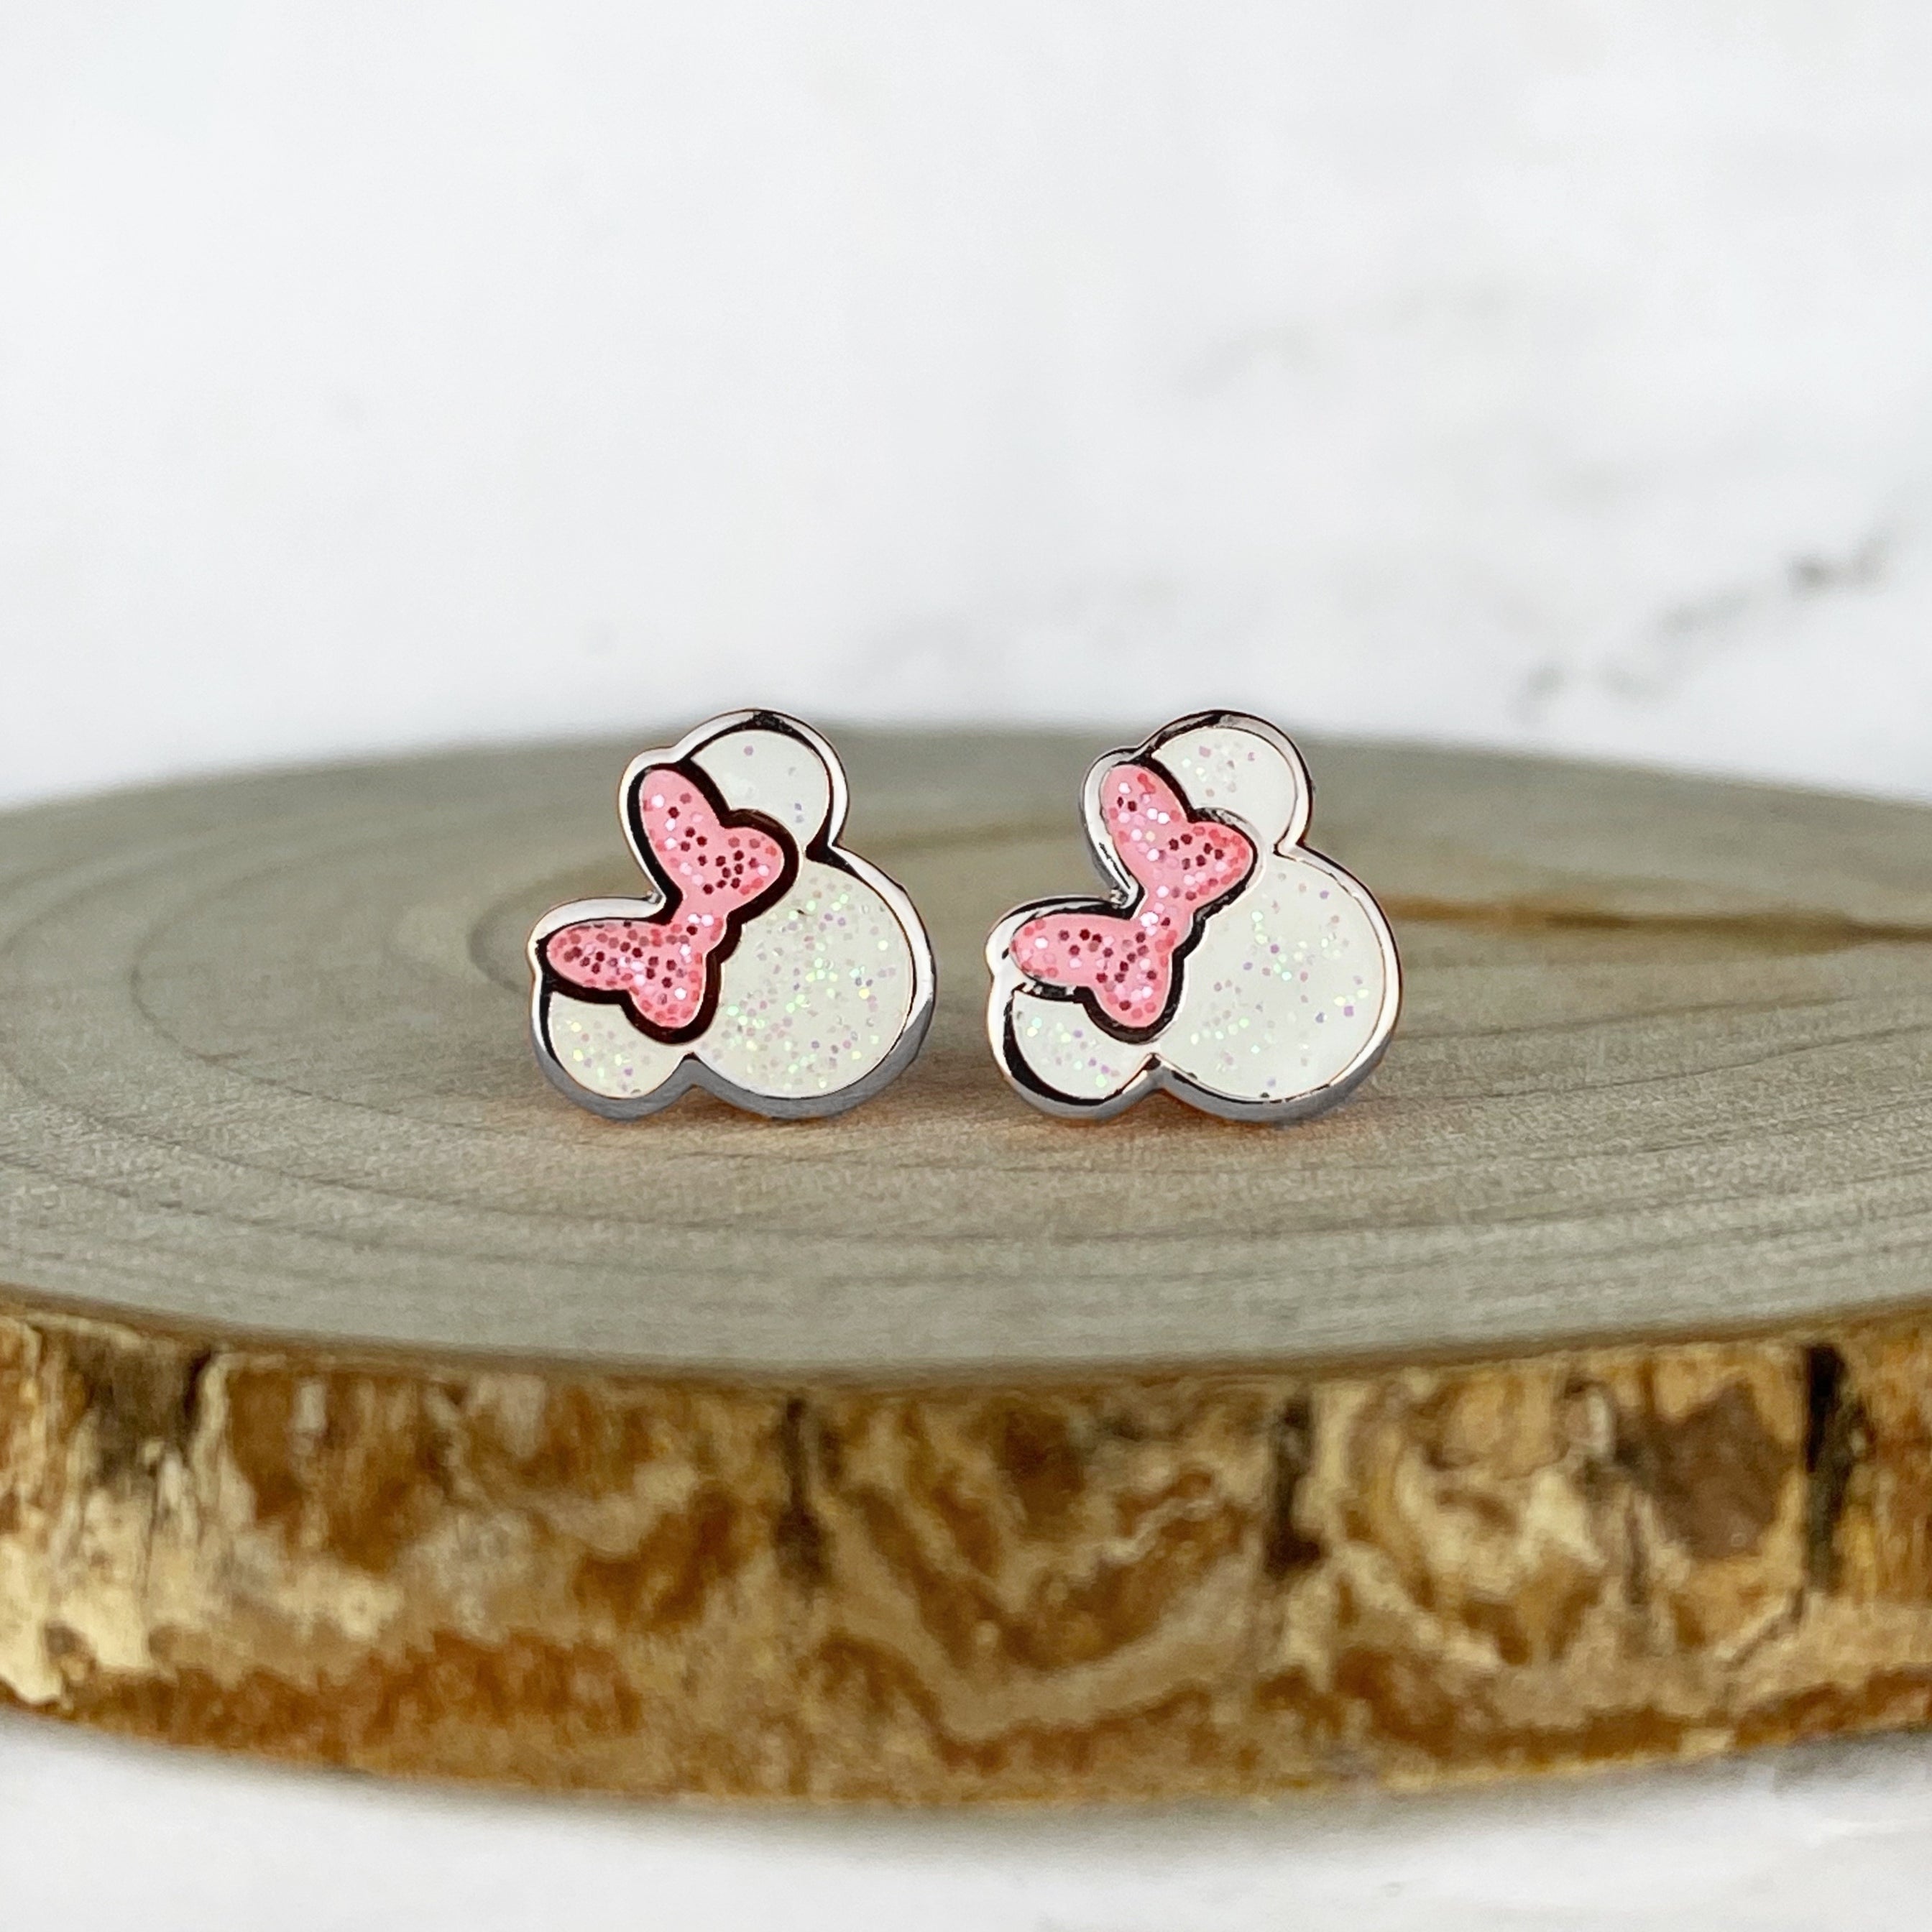 Earrings - Miss Mouse - White and Pink with Silver Finish